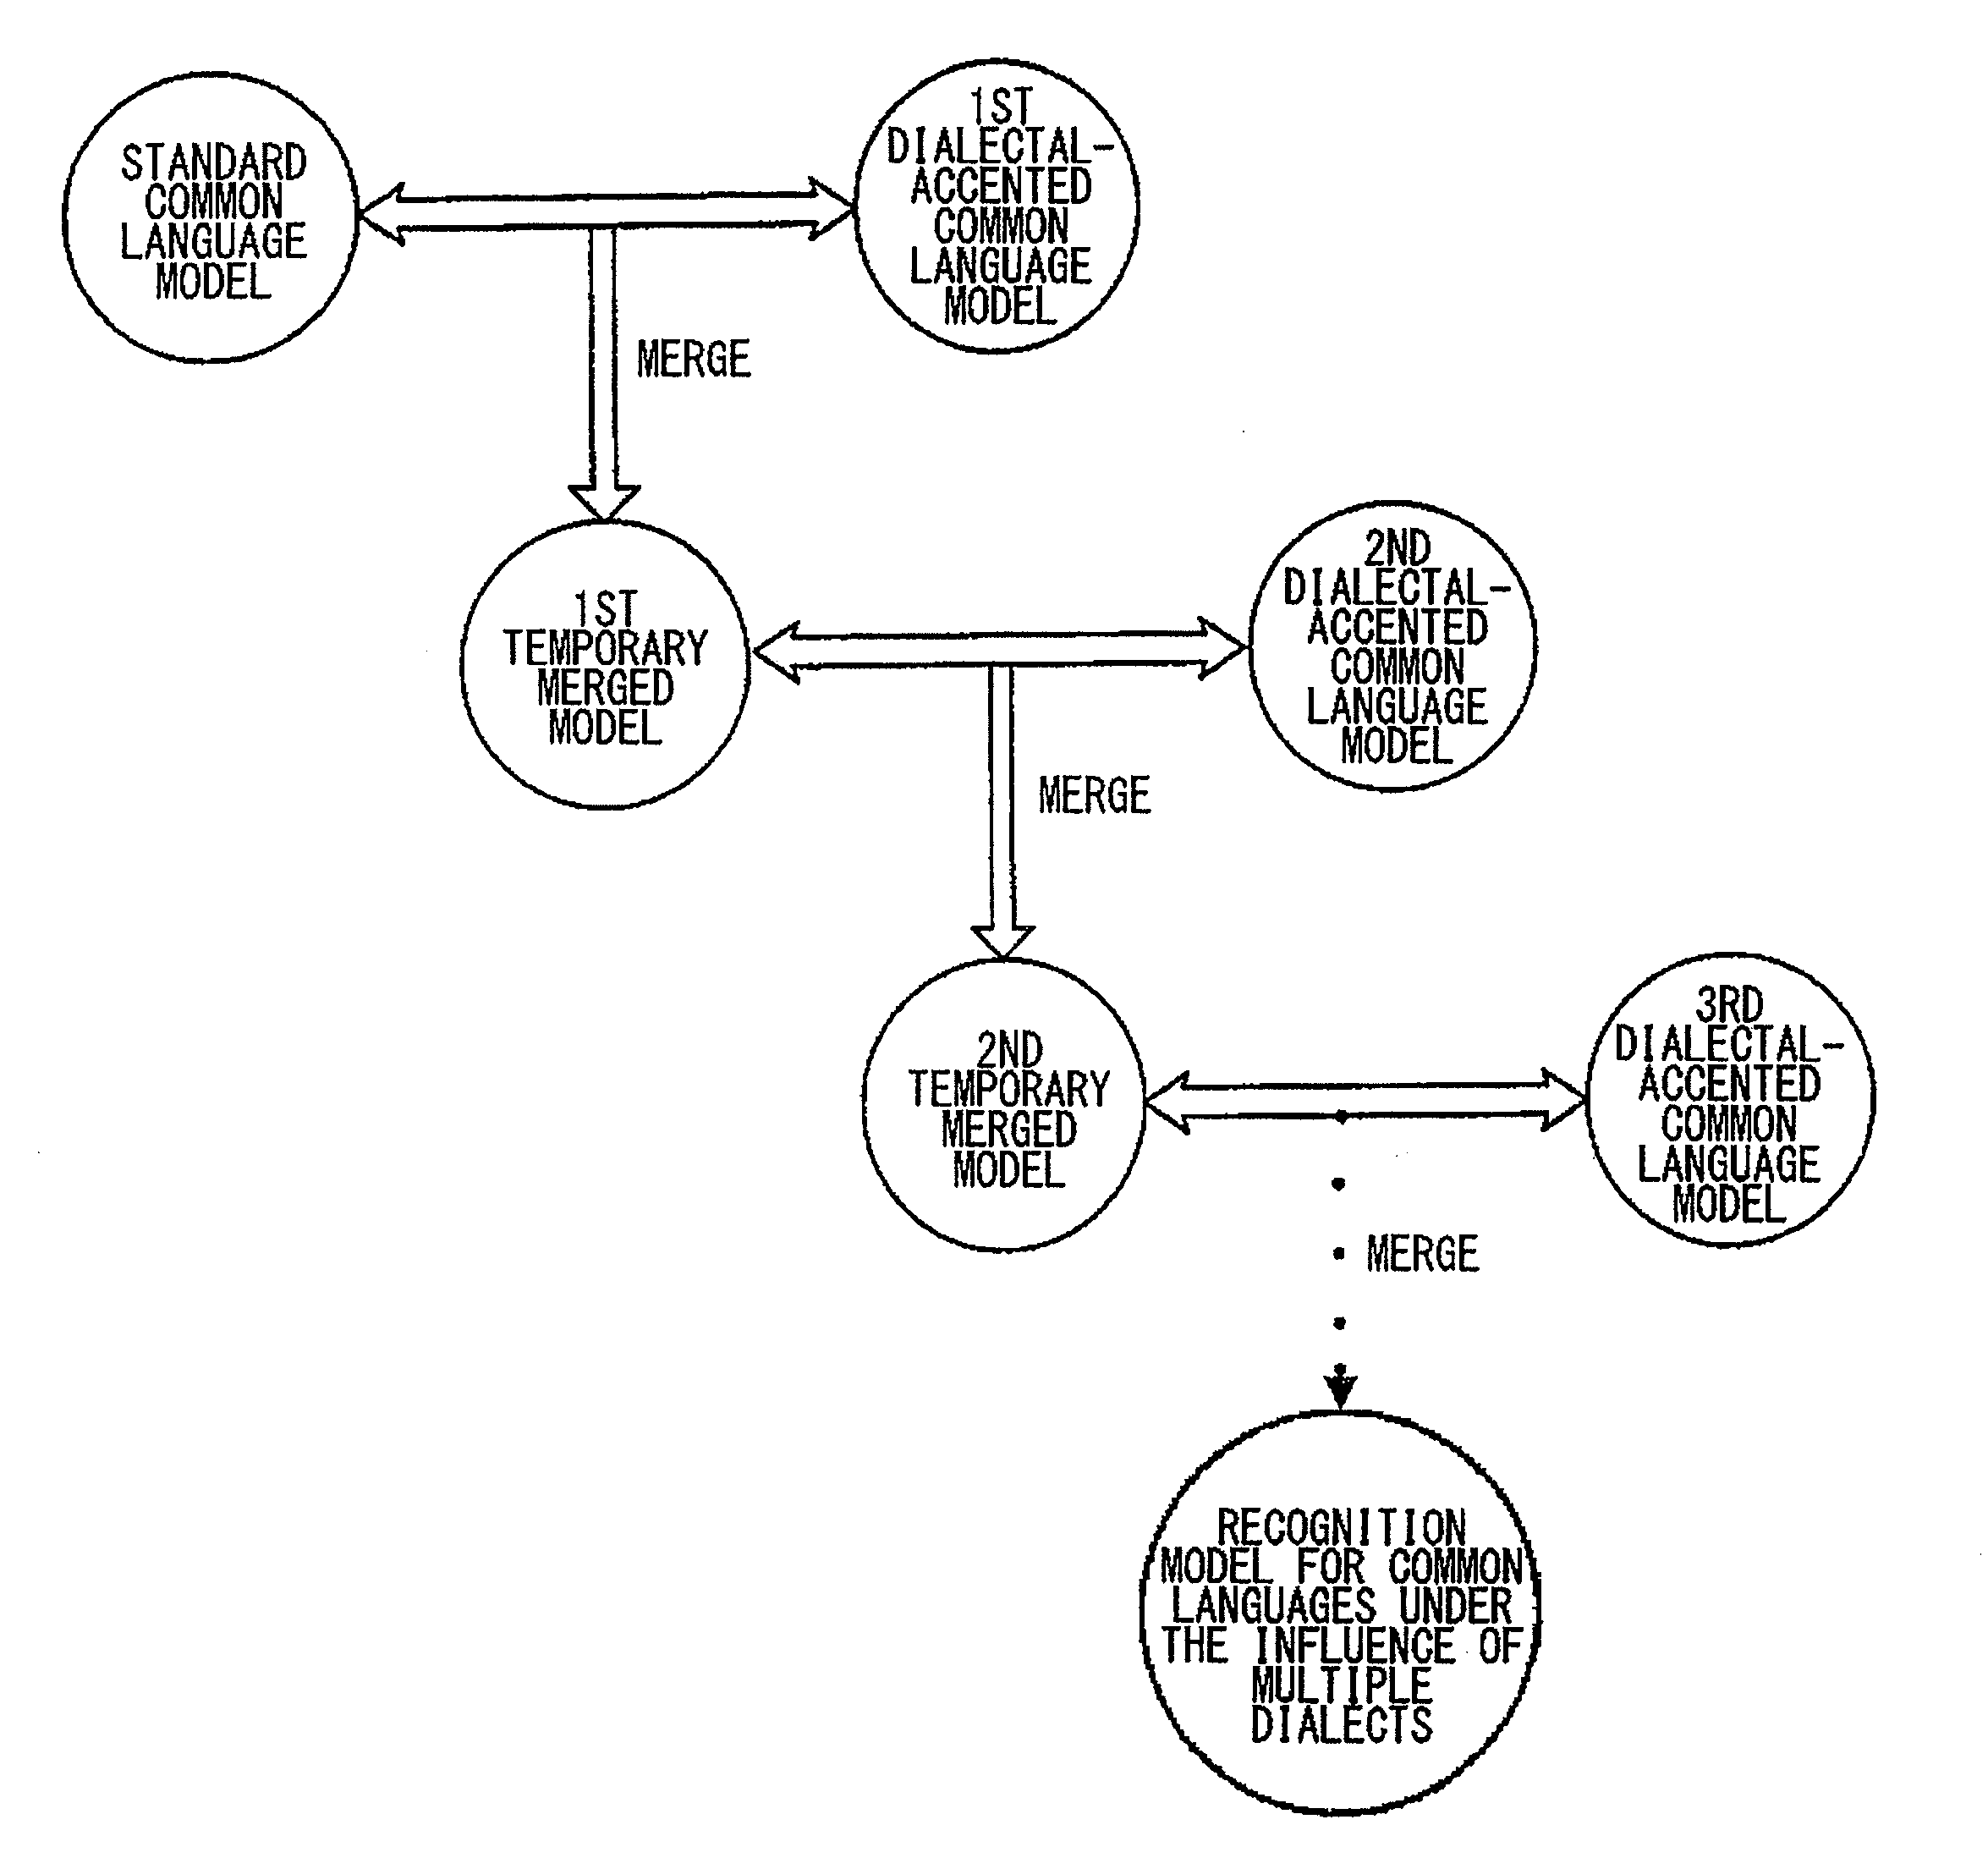 Method and system for modeling a common-language speech recognition, by a computer, under the influence of a plurality of dialects